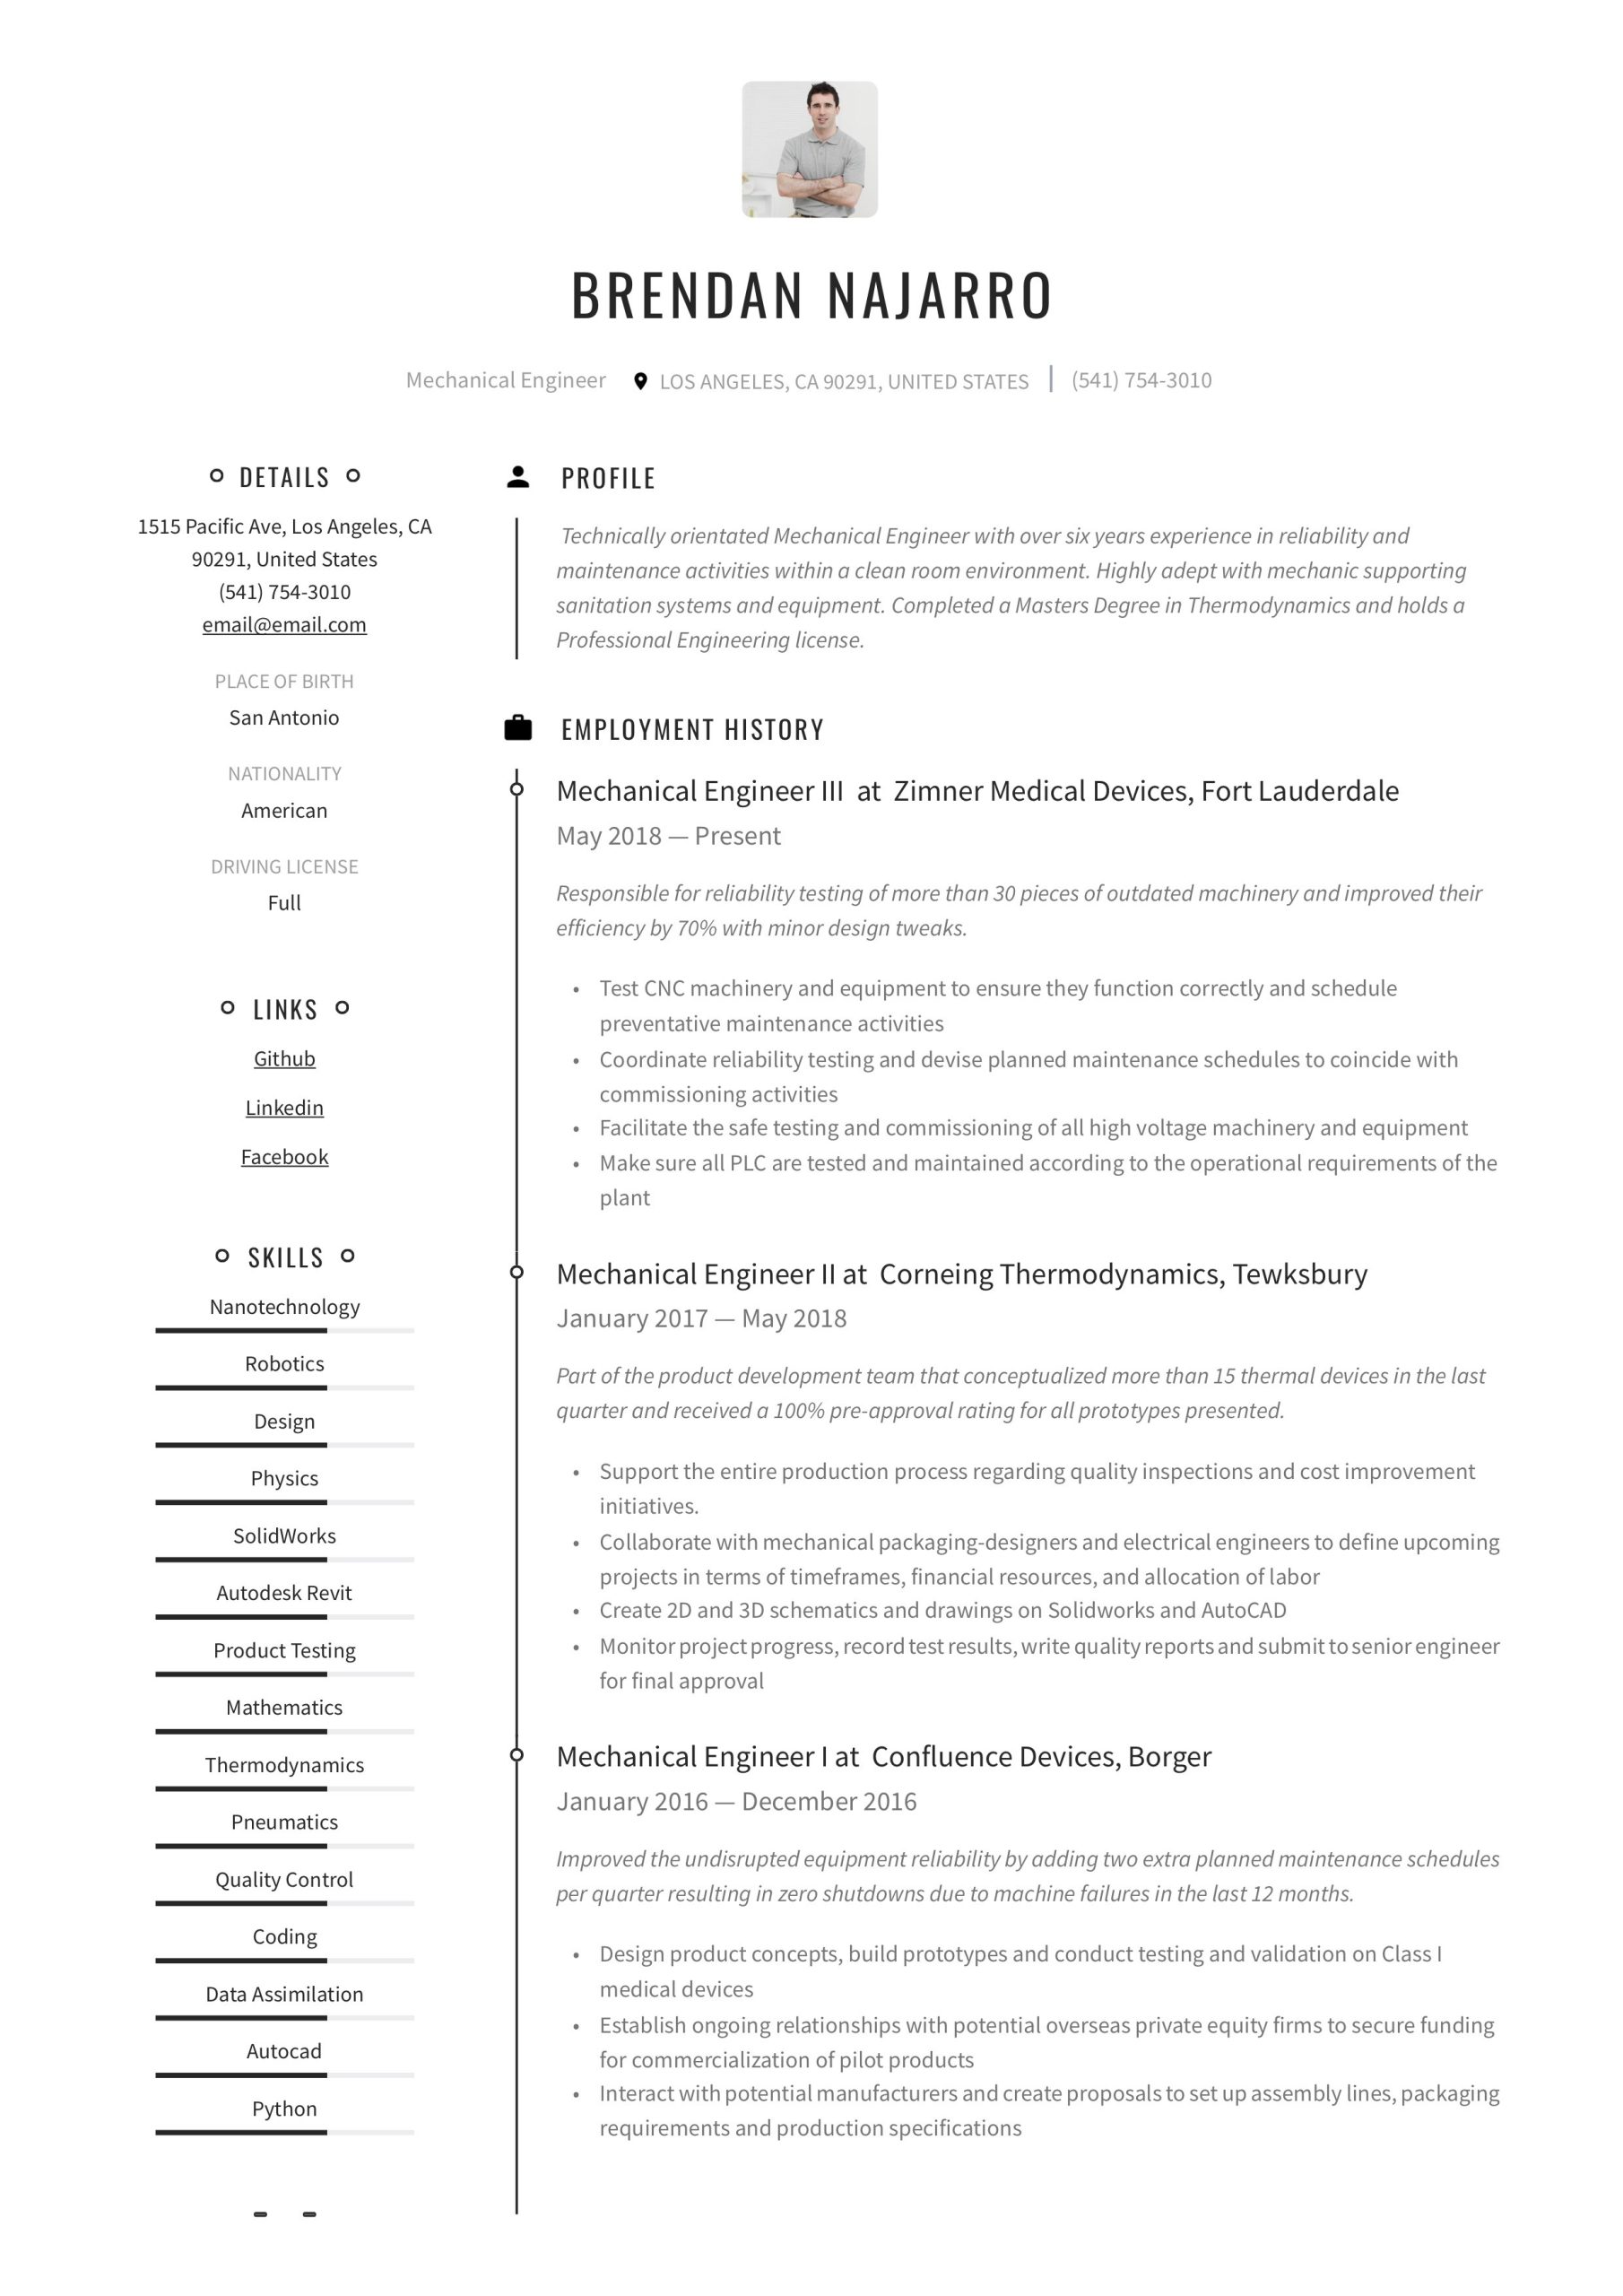 Mechanical Engineer Oil and Gas Resume Samples Mechanical Engineer Resume & Writing Guide  12 Templates Pdf